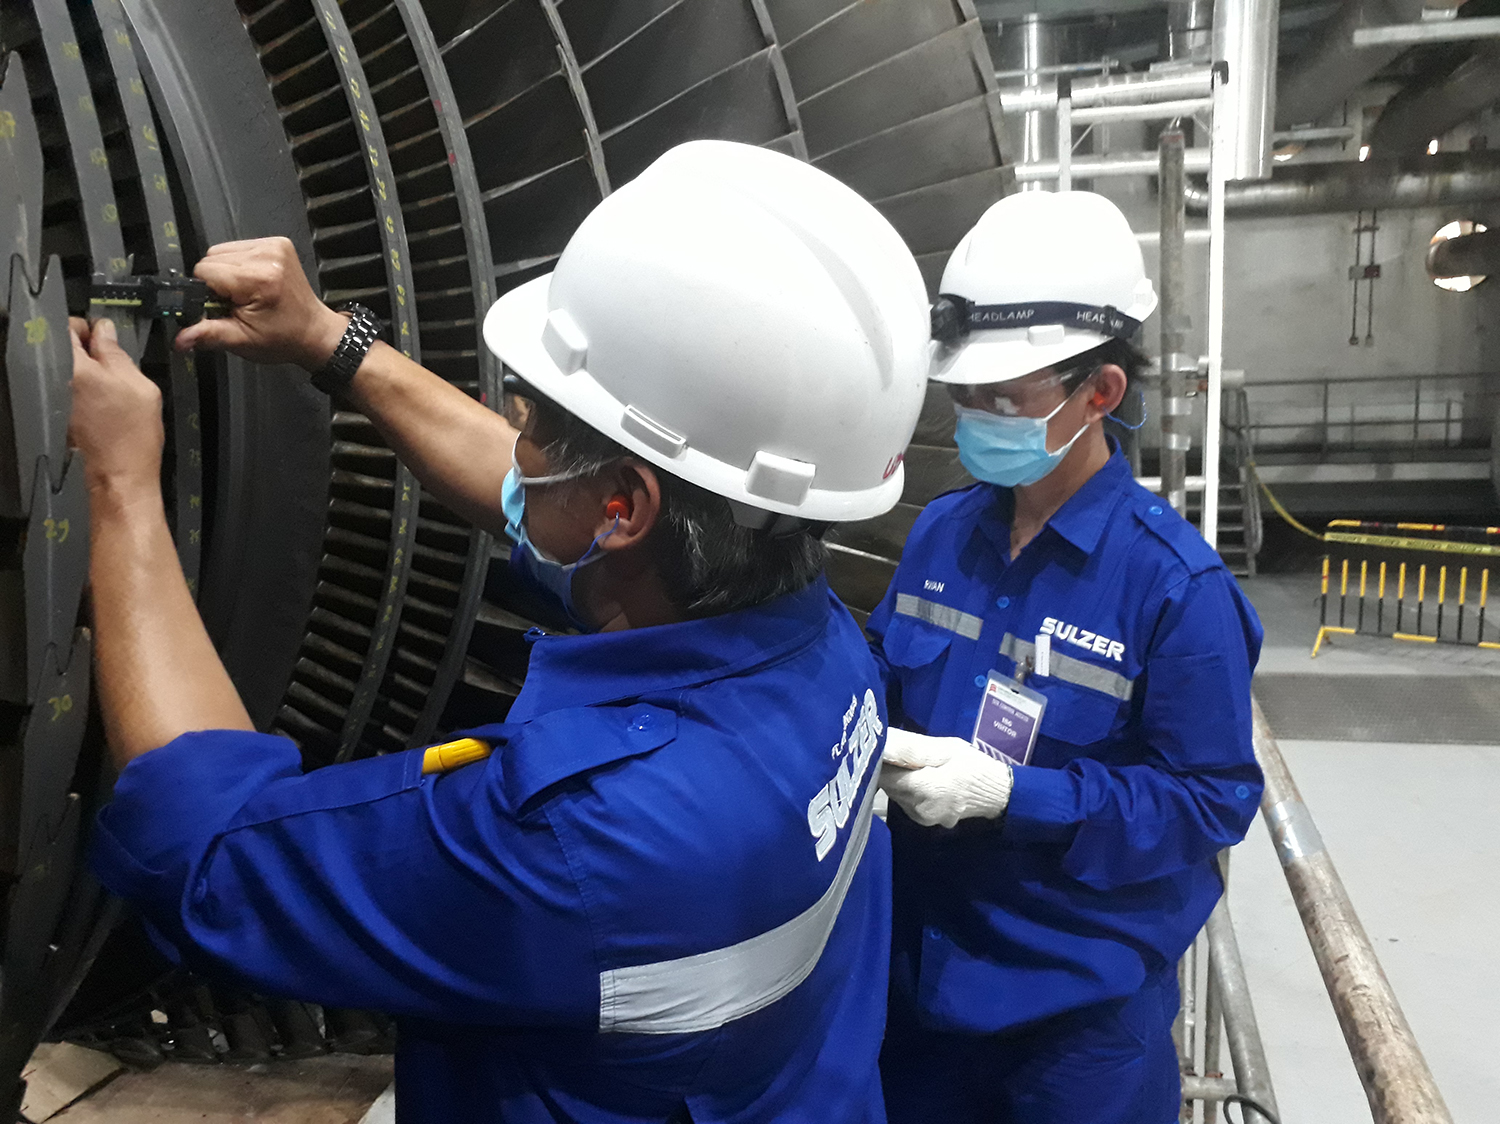 As part of the project, Sulzer’s engineers also assessed the spare rotor, which would require replacement blades